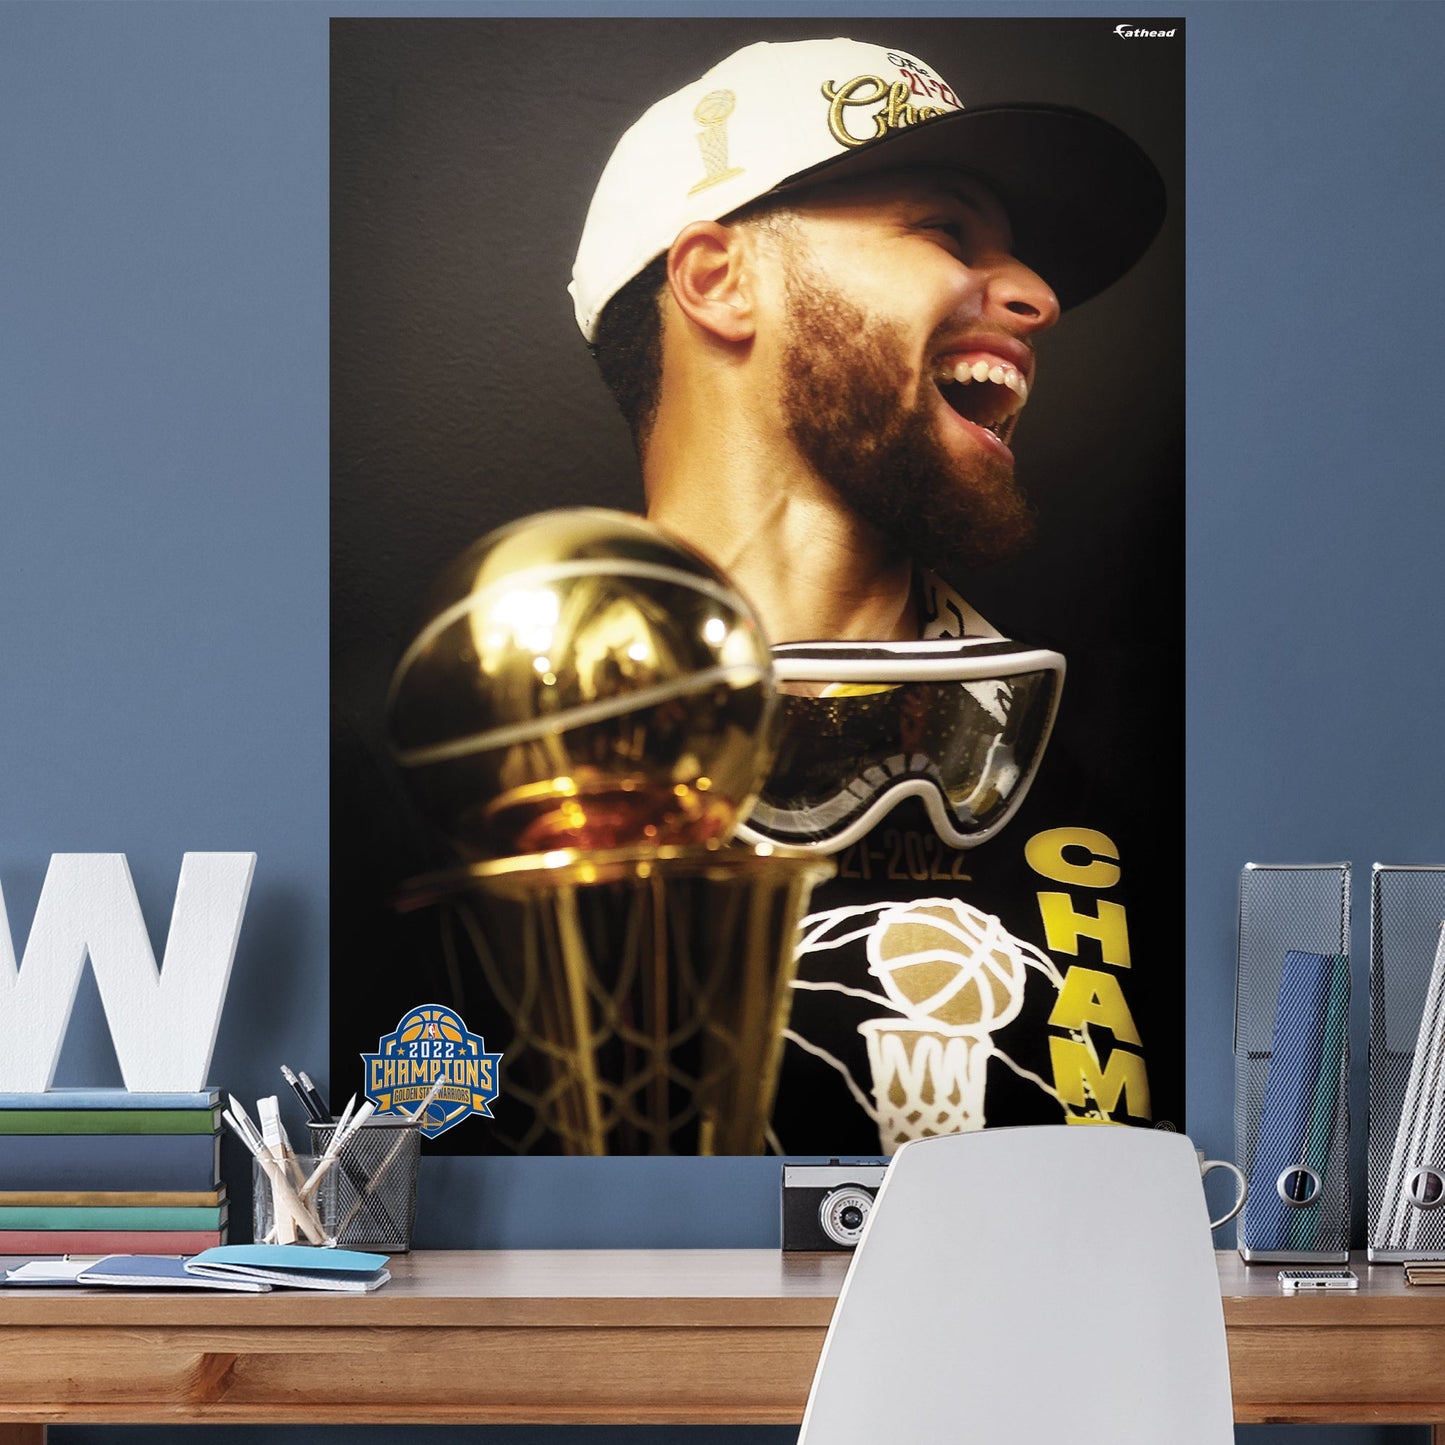 Golden State Warriors: Stephen Curry 2022 Champion Candid Smile Poster - Officially Licensed NBA Removable Adhesive Decal